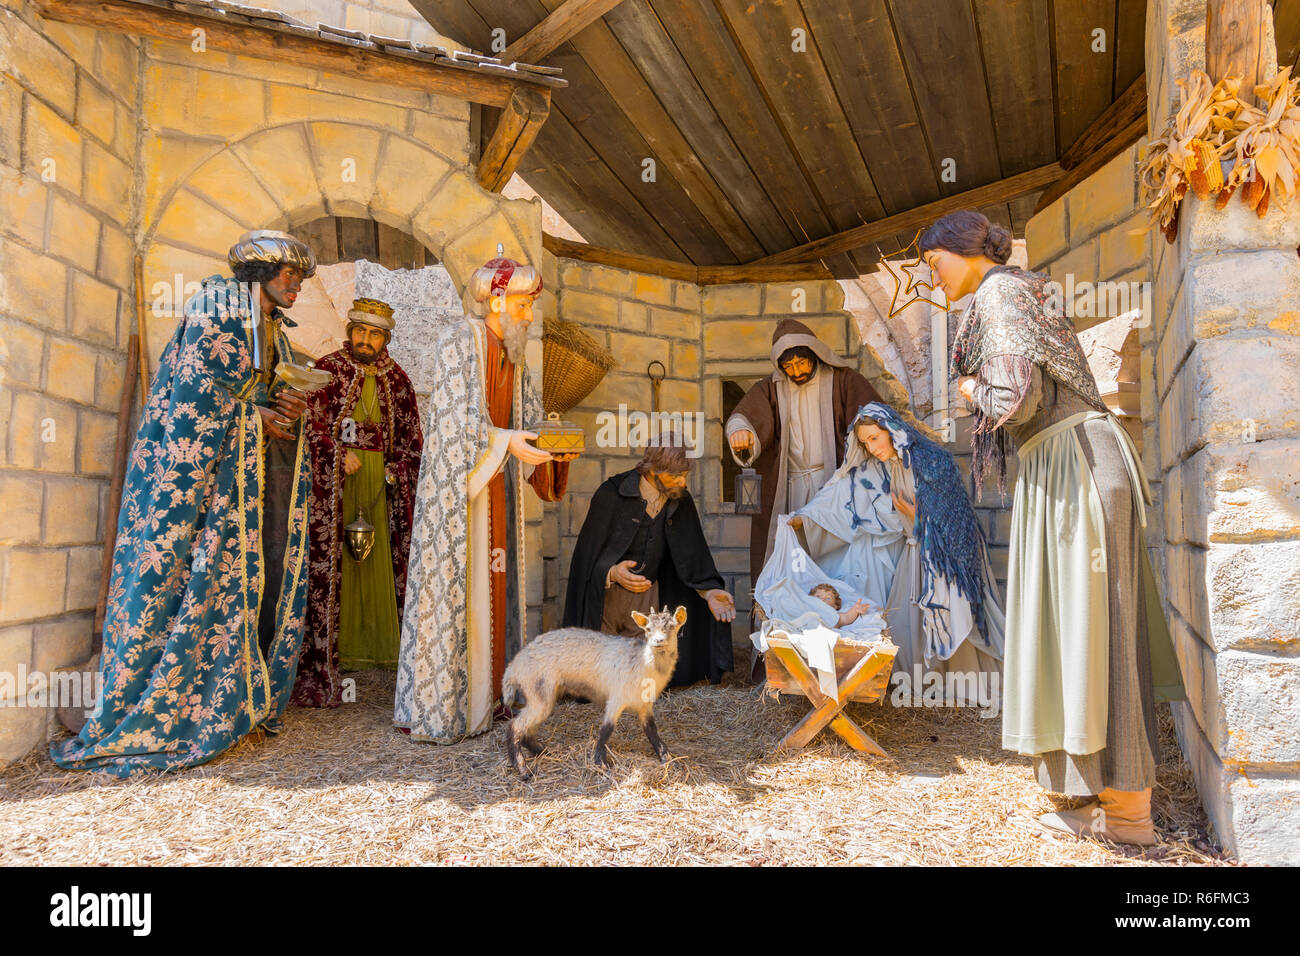 Traditional Nativity Scene Depict Three Kings Visiting The Infant Jesus On The Night Of His Birth In Bethlehem Stock Photo